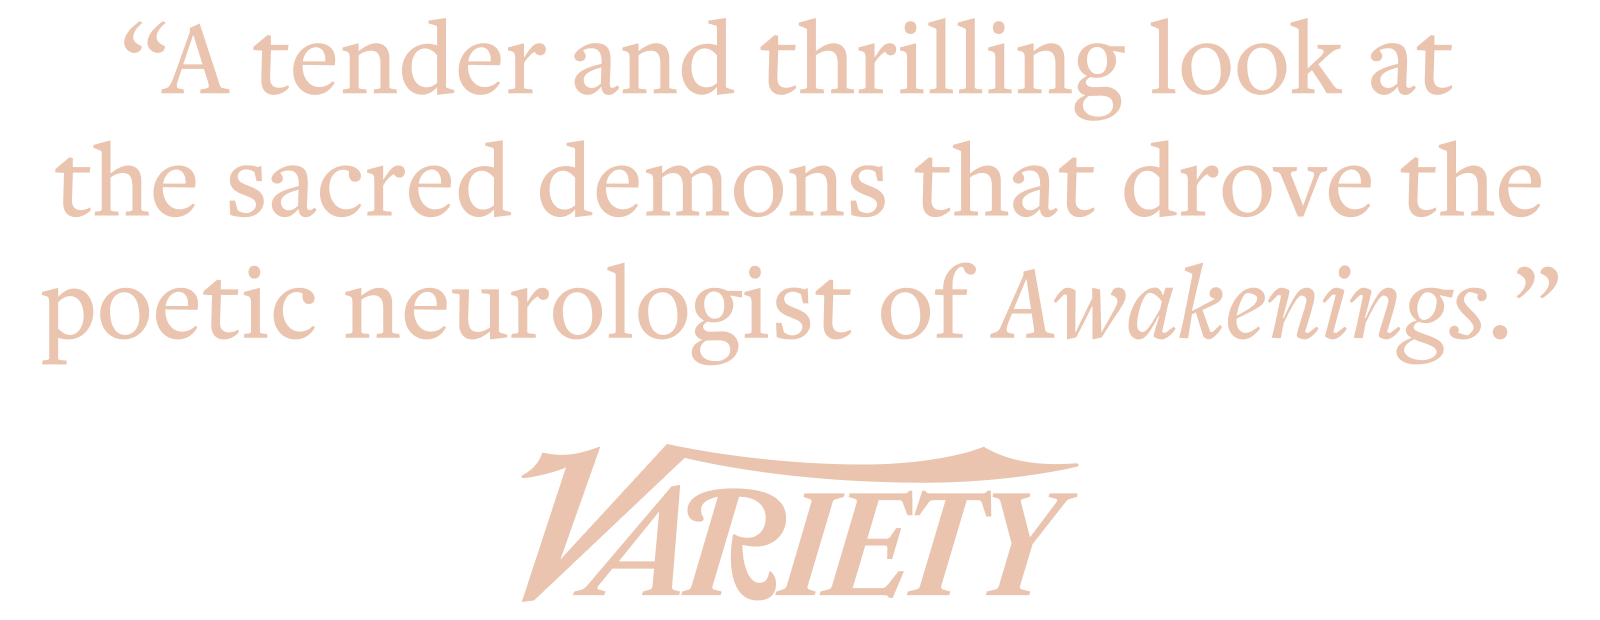 "A tender and thrilling look at the sacred demons that drove the poetic neurologist of Awakenings." — Variety Magazine